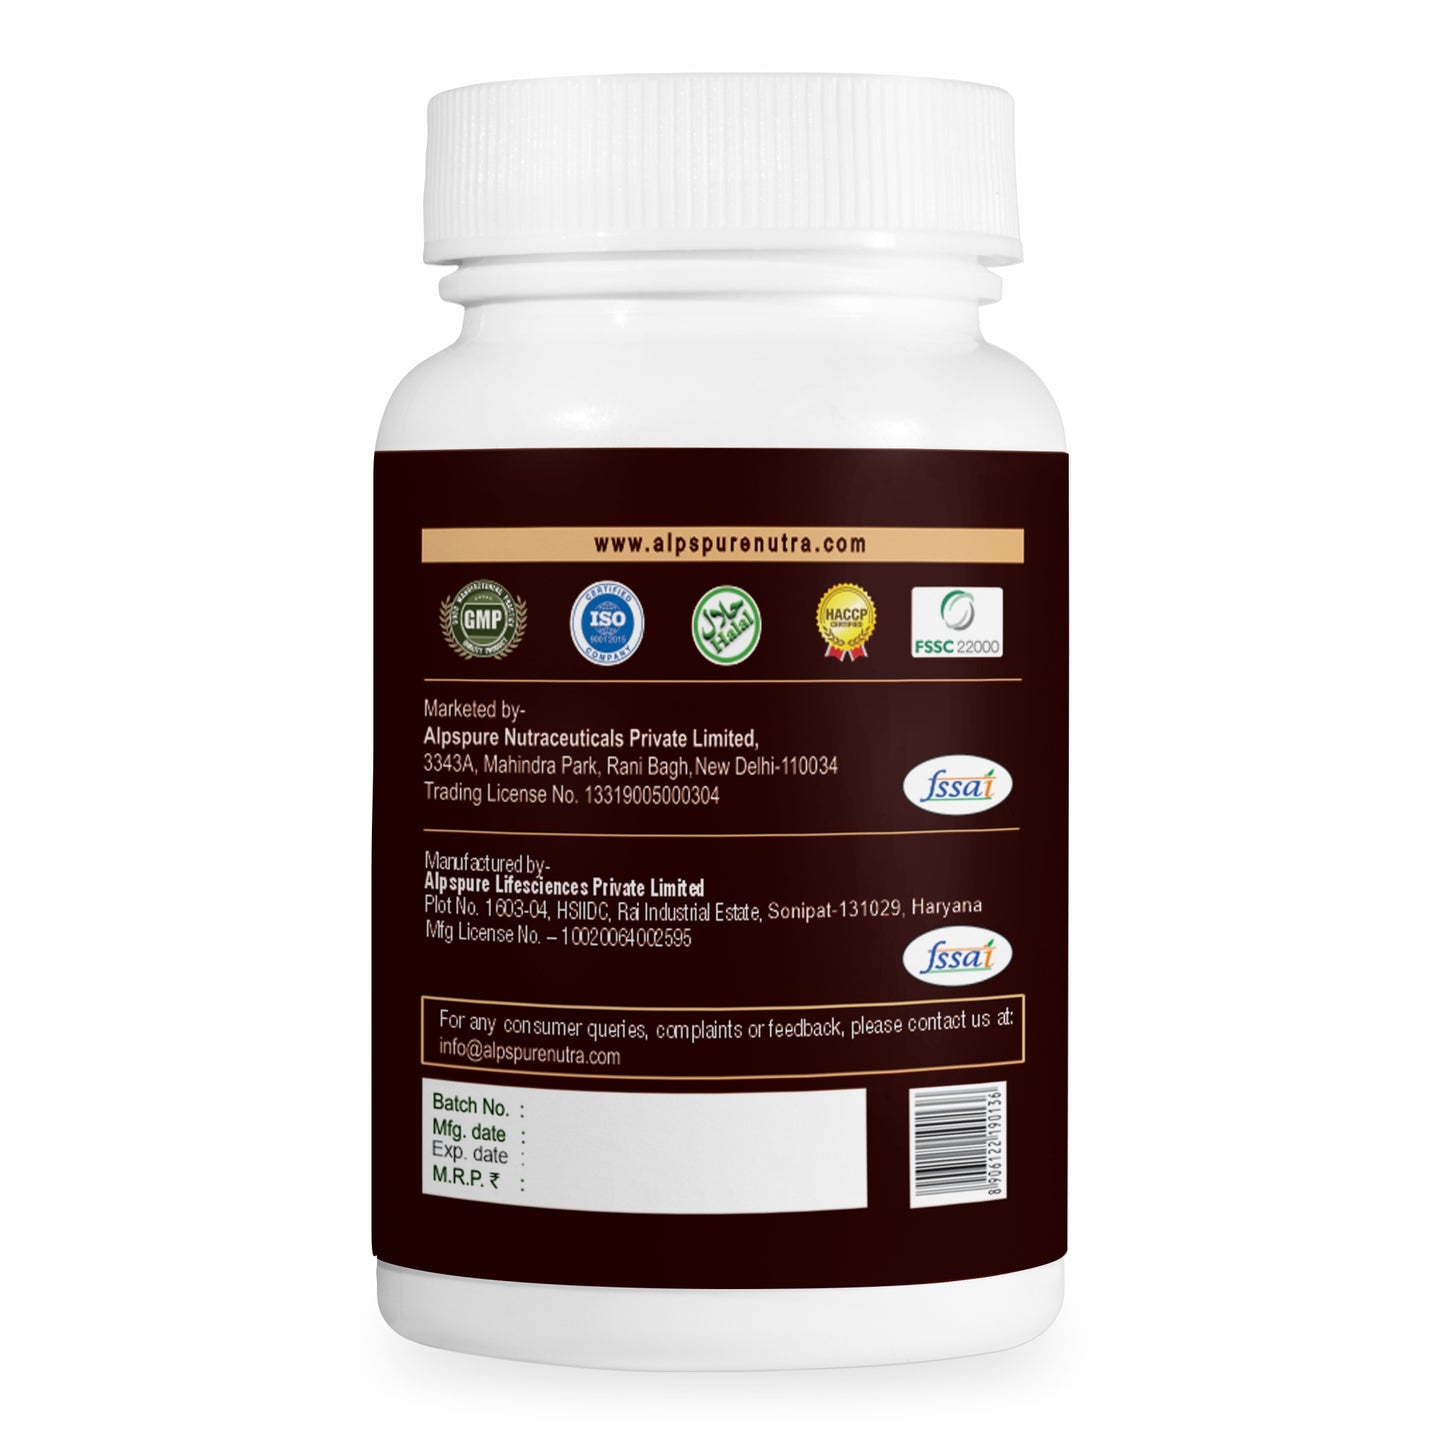 Boost Energy & Focus with Panax Ginseng - Tablets